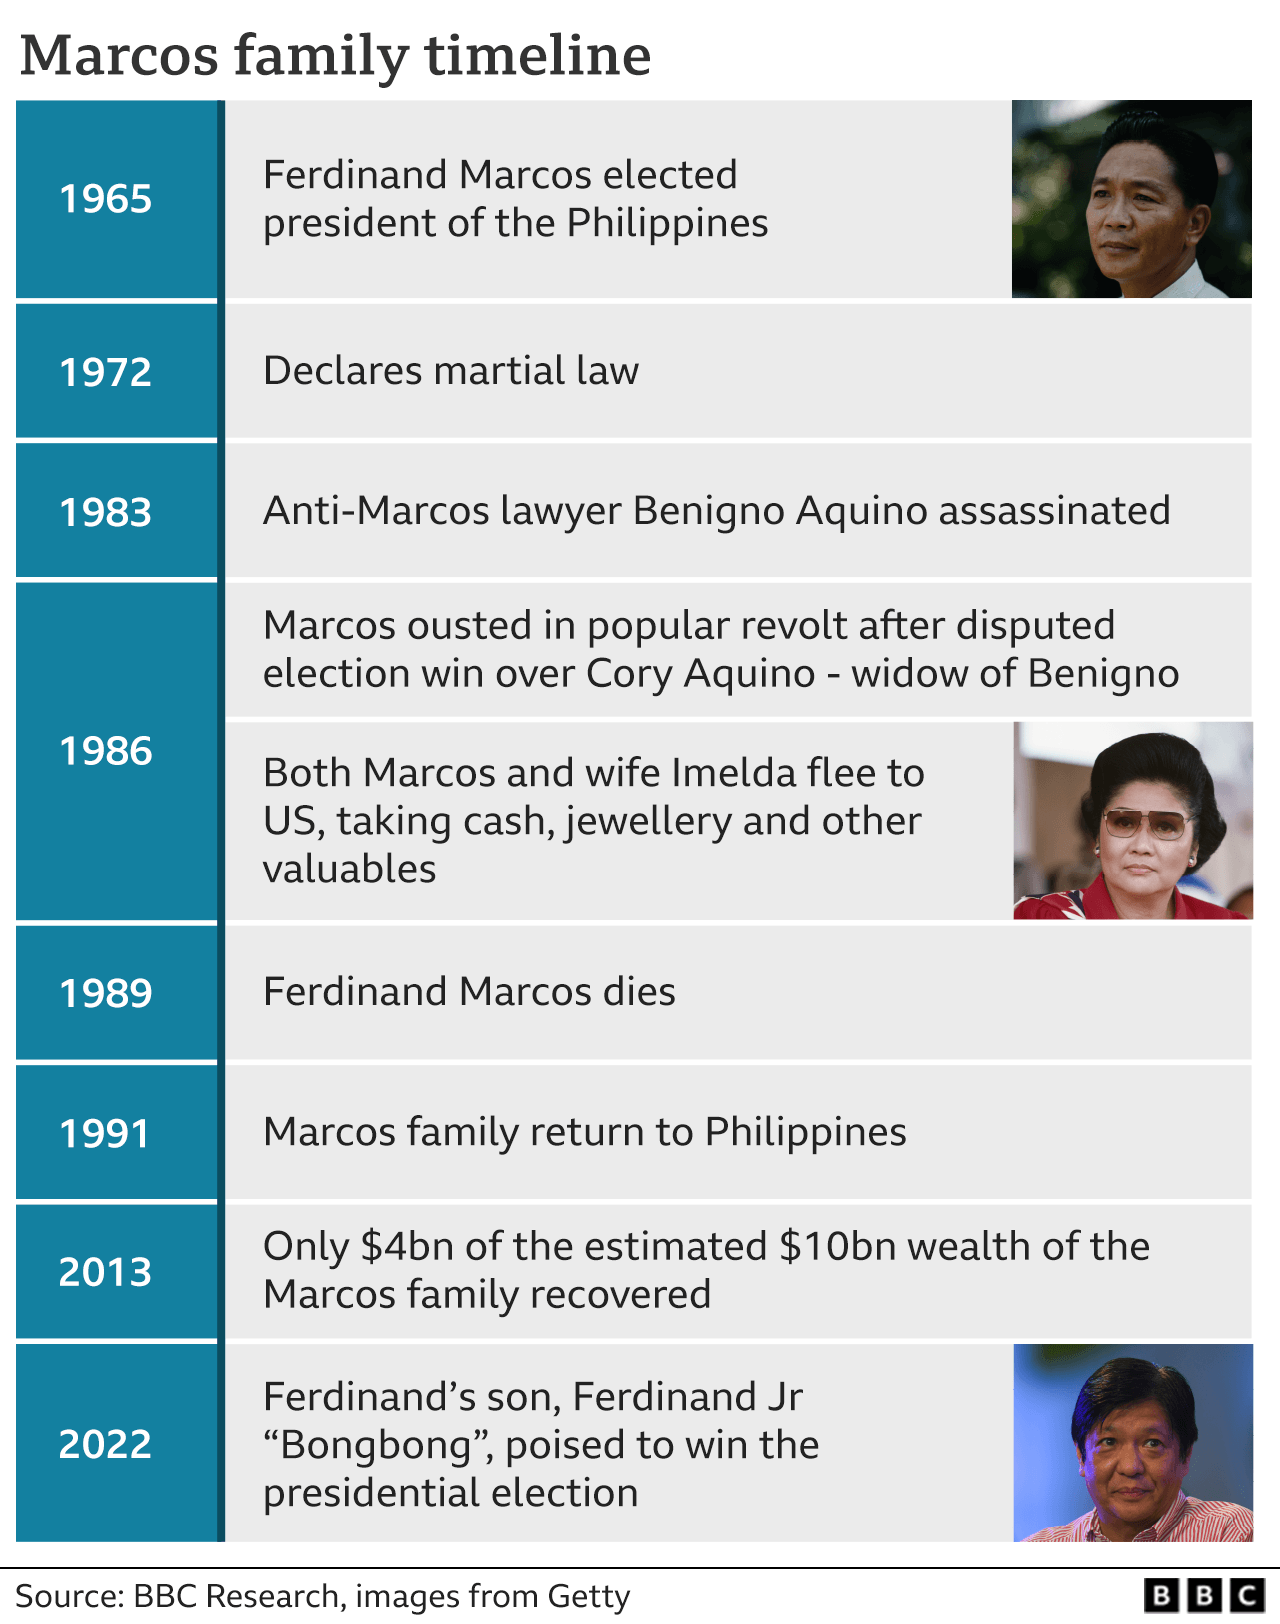 Graphic shows a timeline of the Marcos family